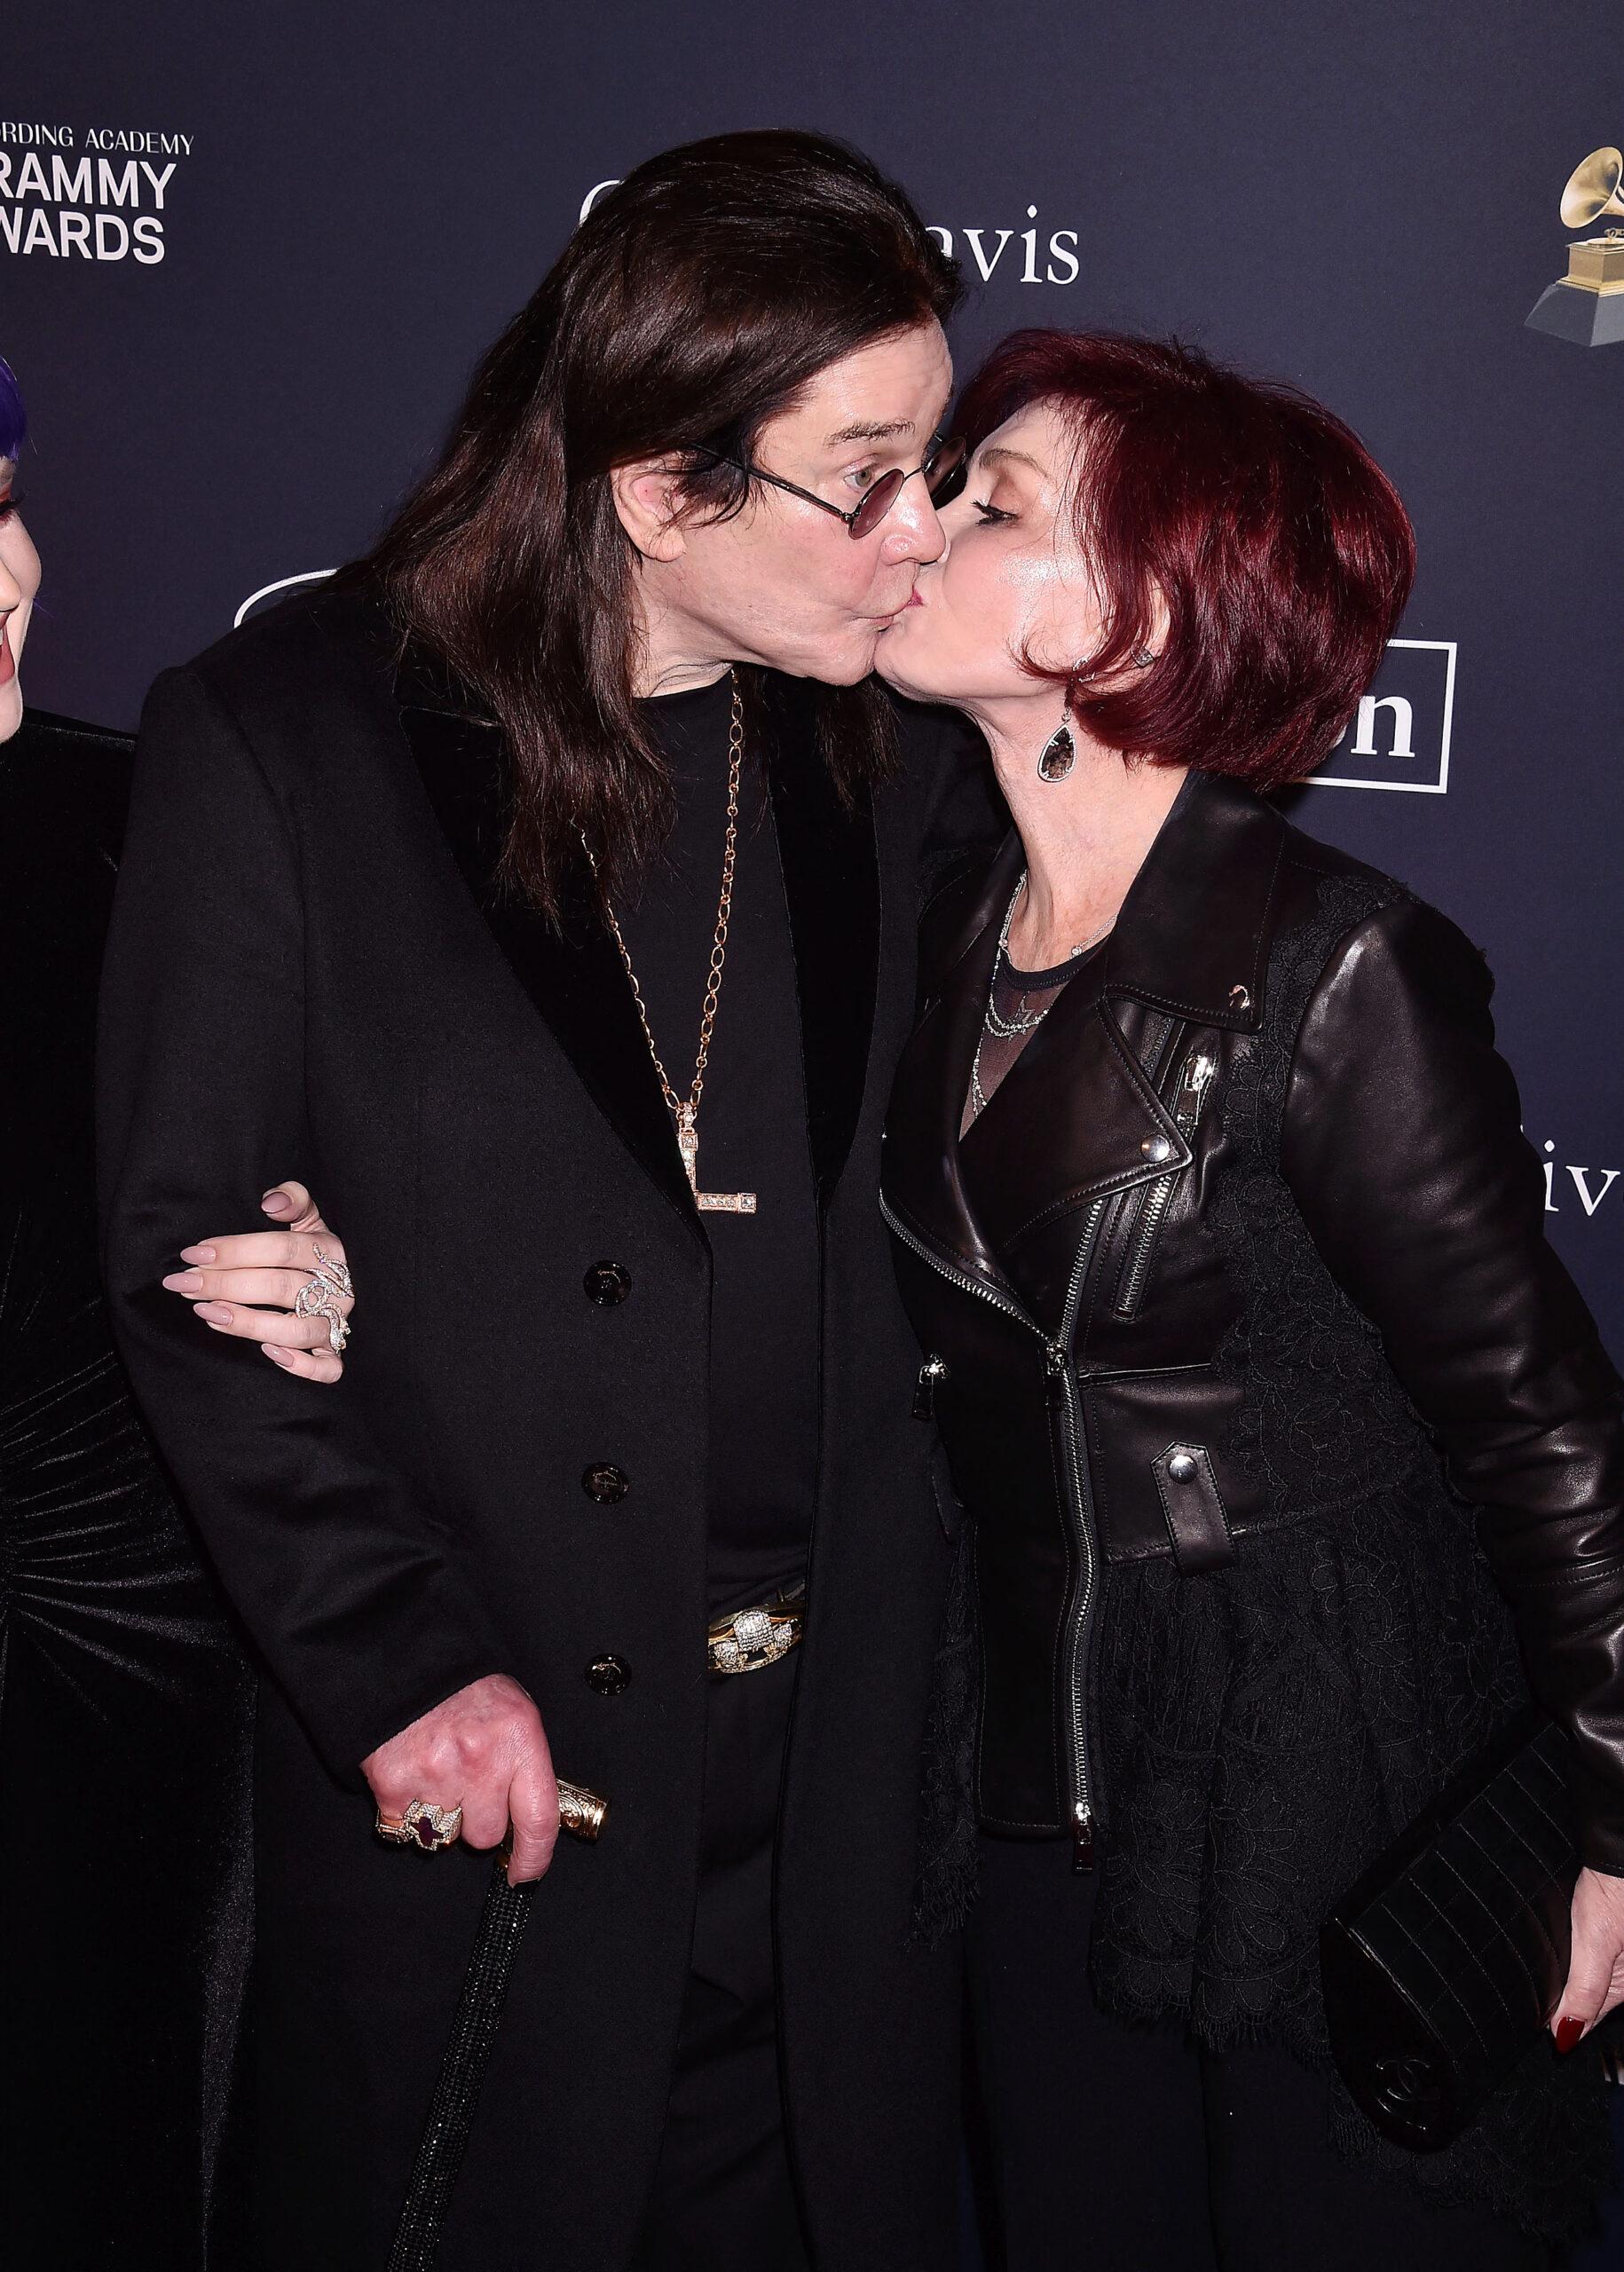 Ozzy Osbourne and Sharon Osbourne at The Pre-Grammy Gala and Grammy Salute to Industry Icons Honoring Sean "Diddy" Combs